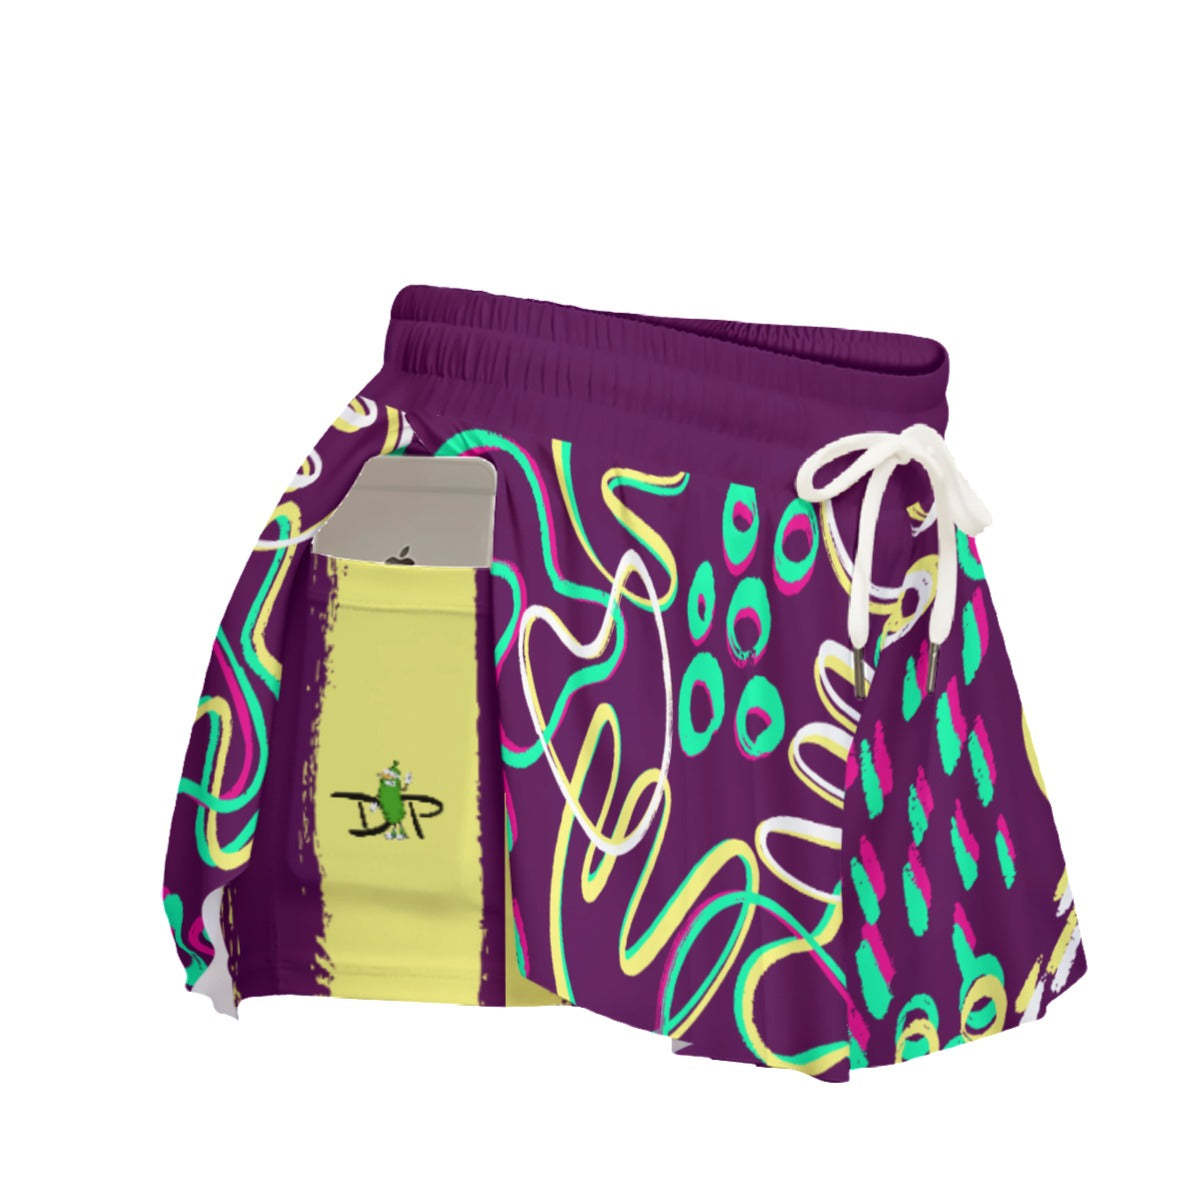 Dizzy Pickle Charlotte Doodles Pickleball Women's Sport Culottes Skorts with Inner Shorts and Pockets Plum